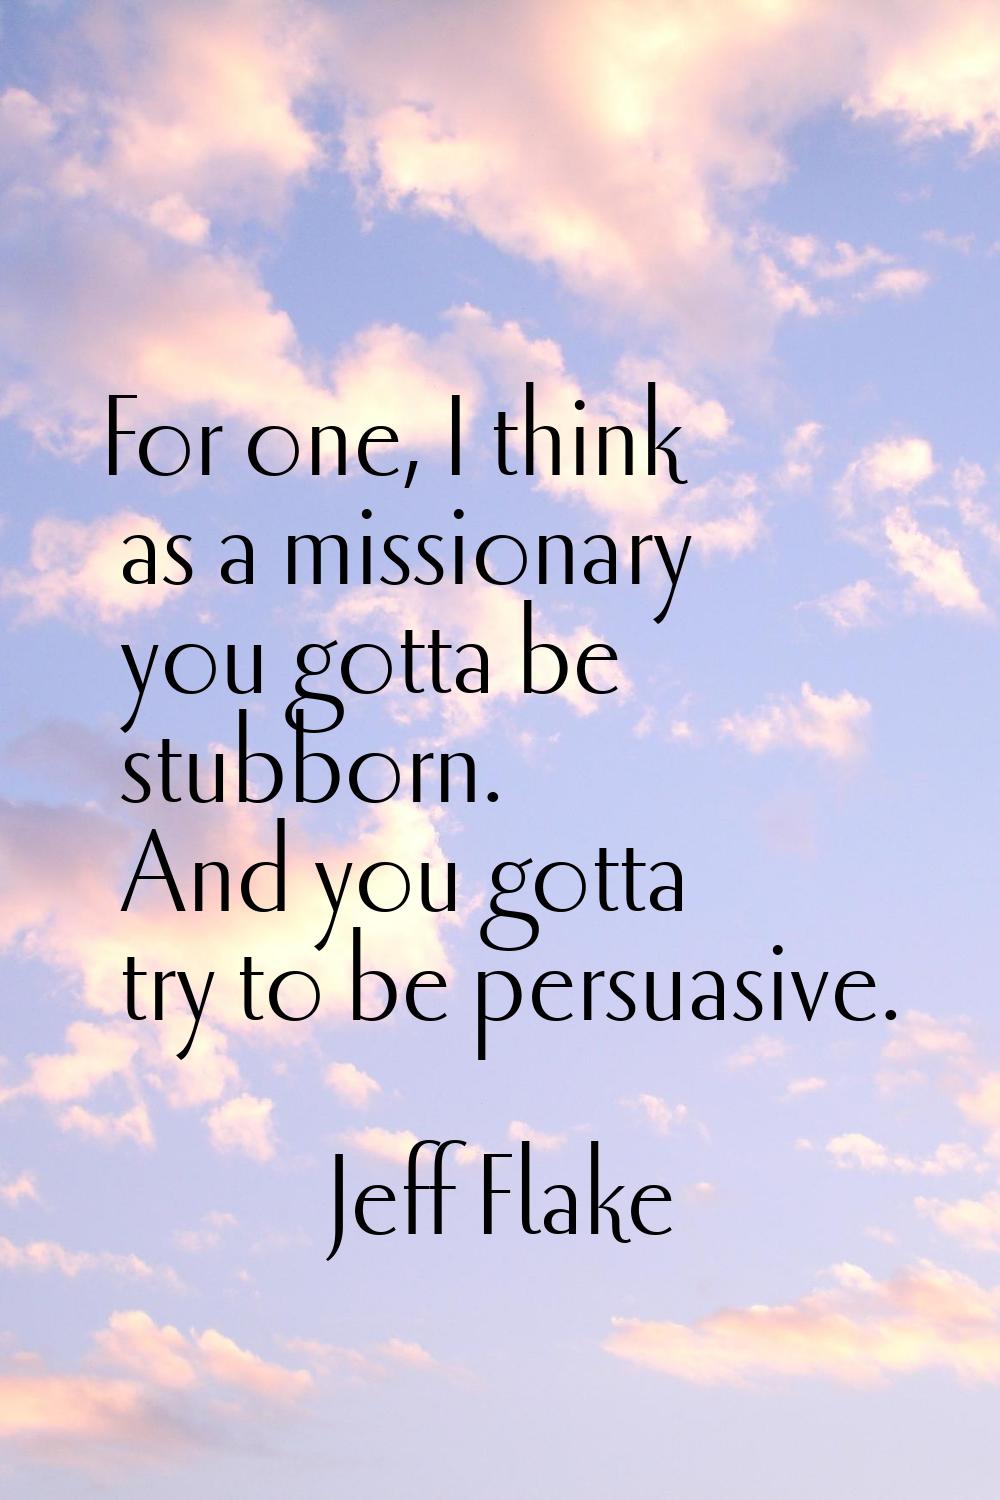 For one, I think as a missionary you gotta be stubborn. And you gotta try to be persuasive.